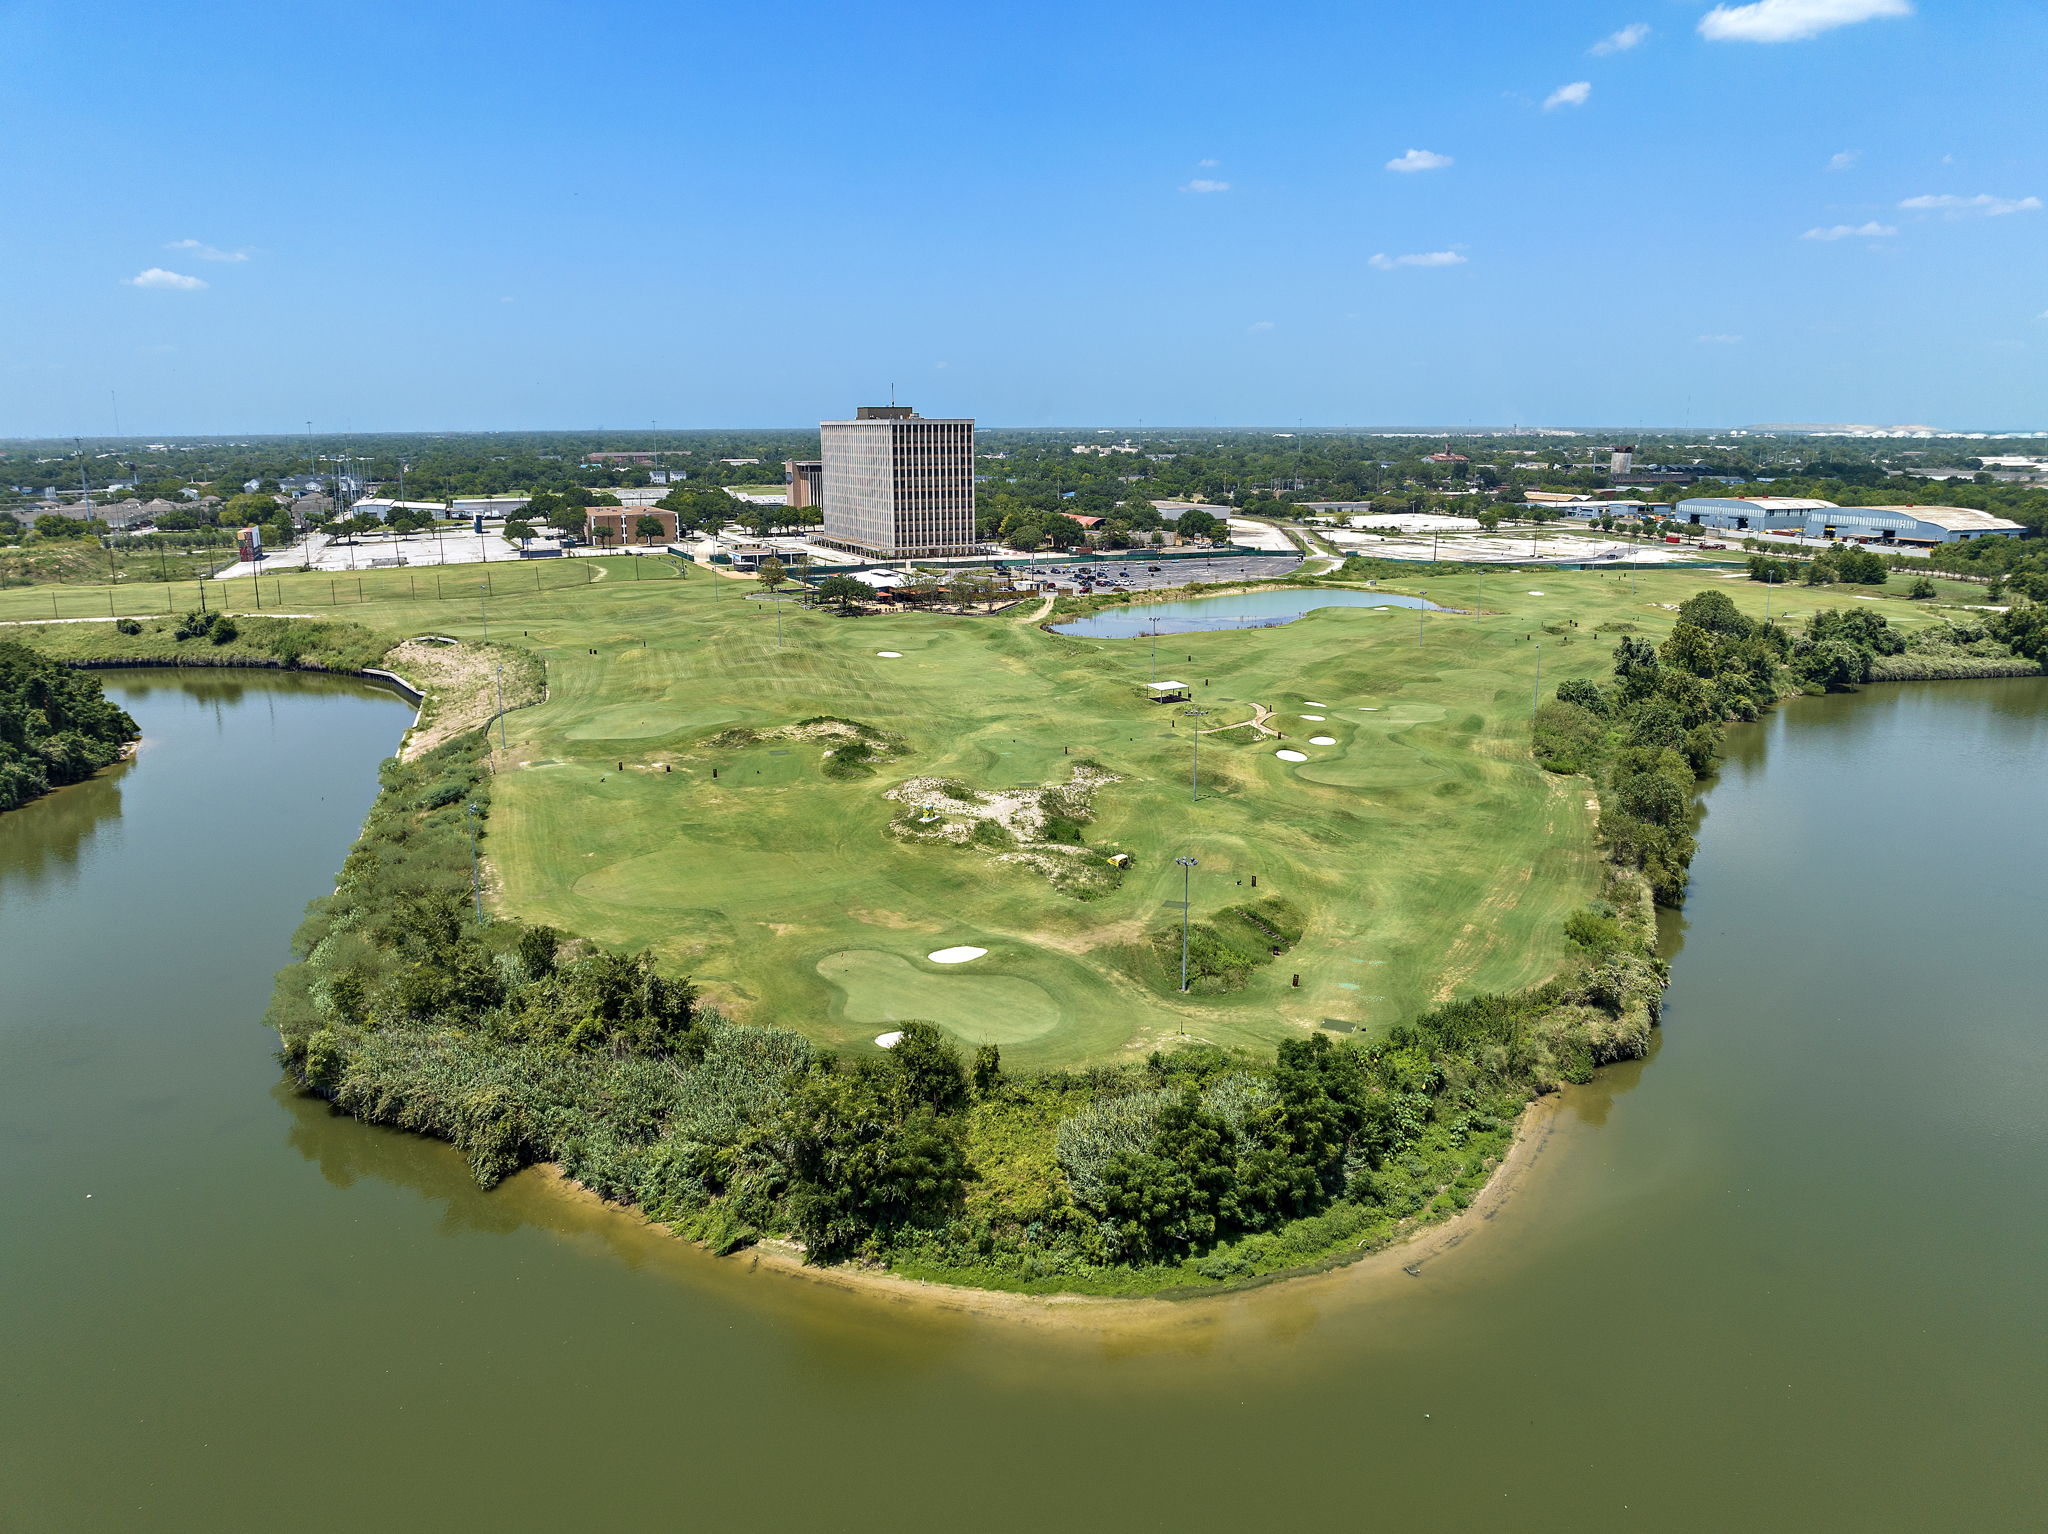 Aerial view of the East River 9 Golf Course, showcasing well-maintained fairways and putting greens.